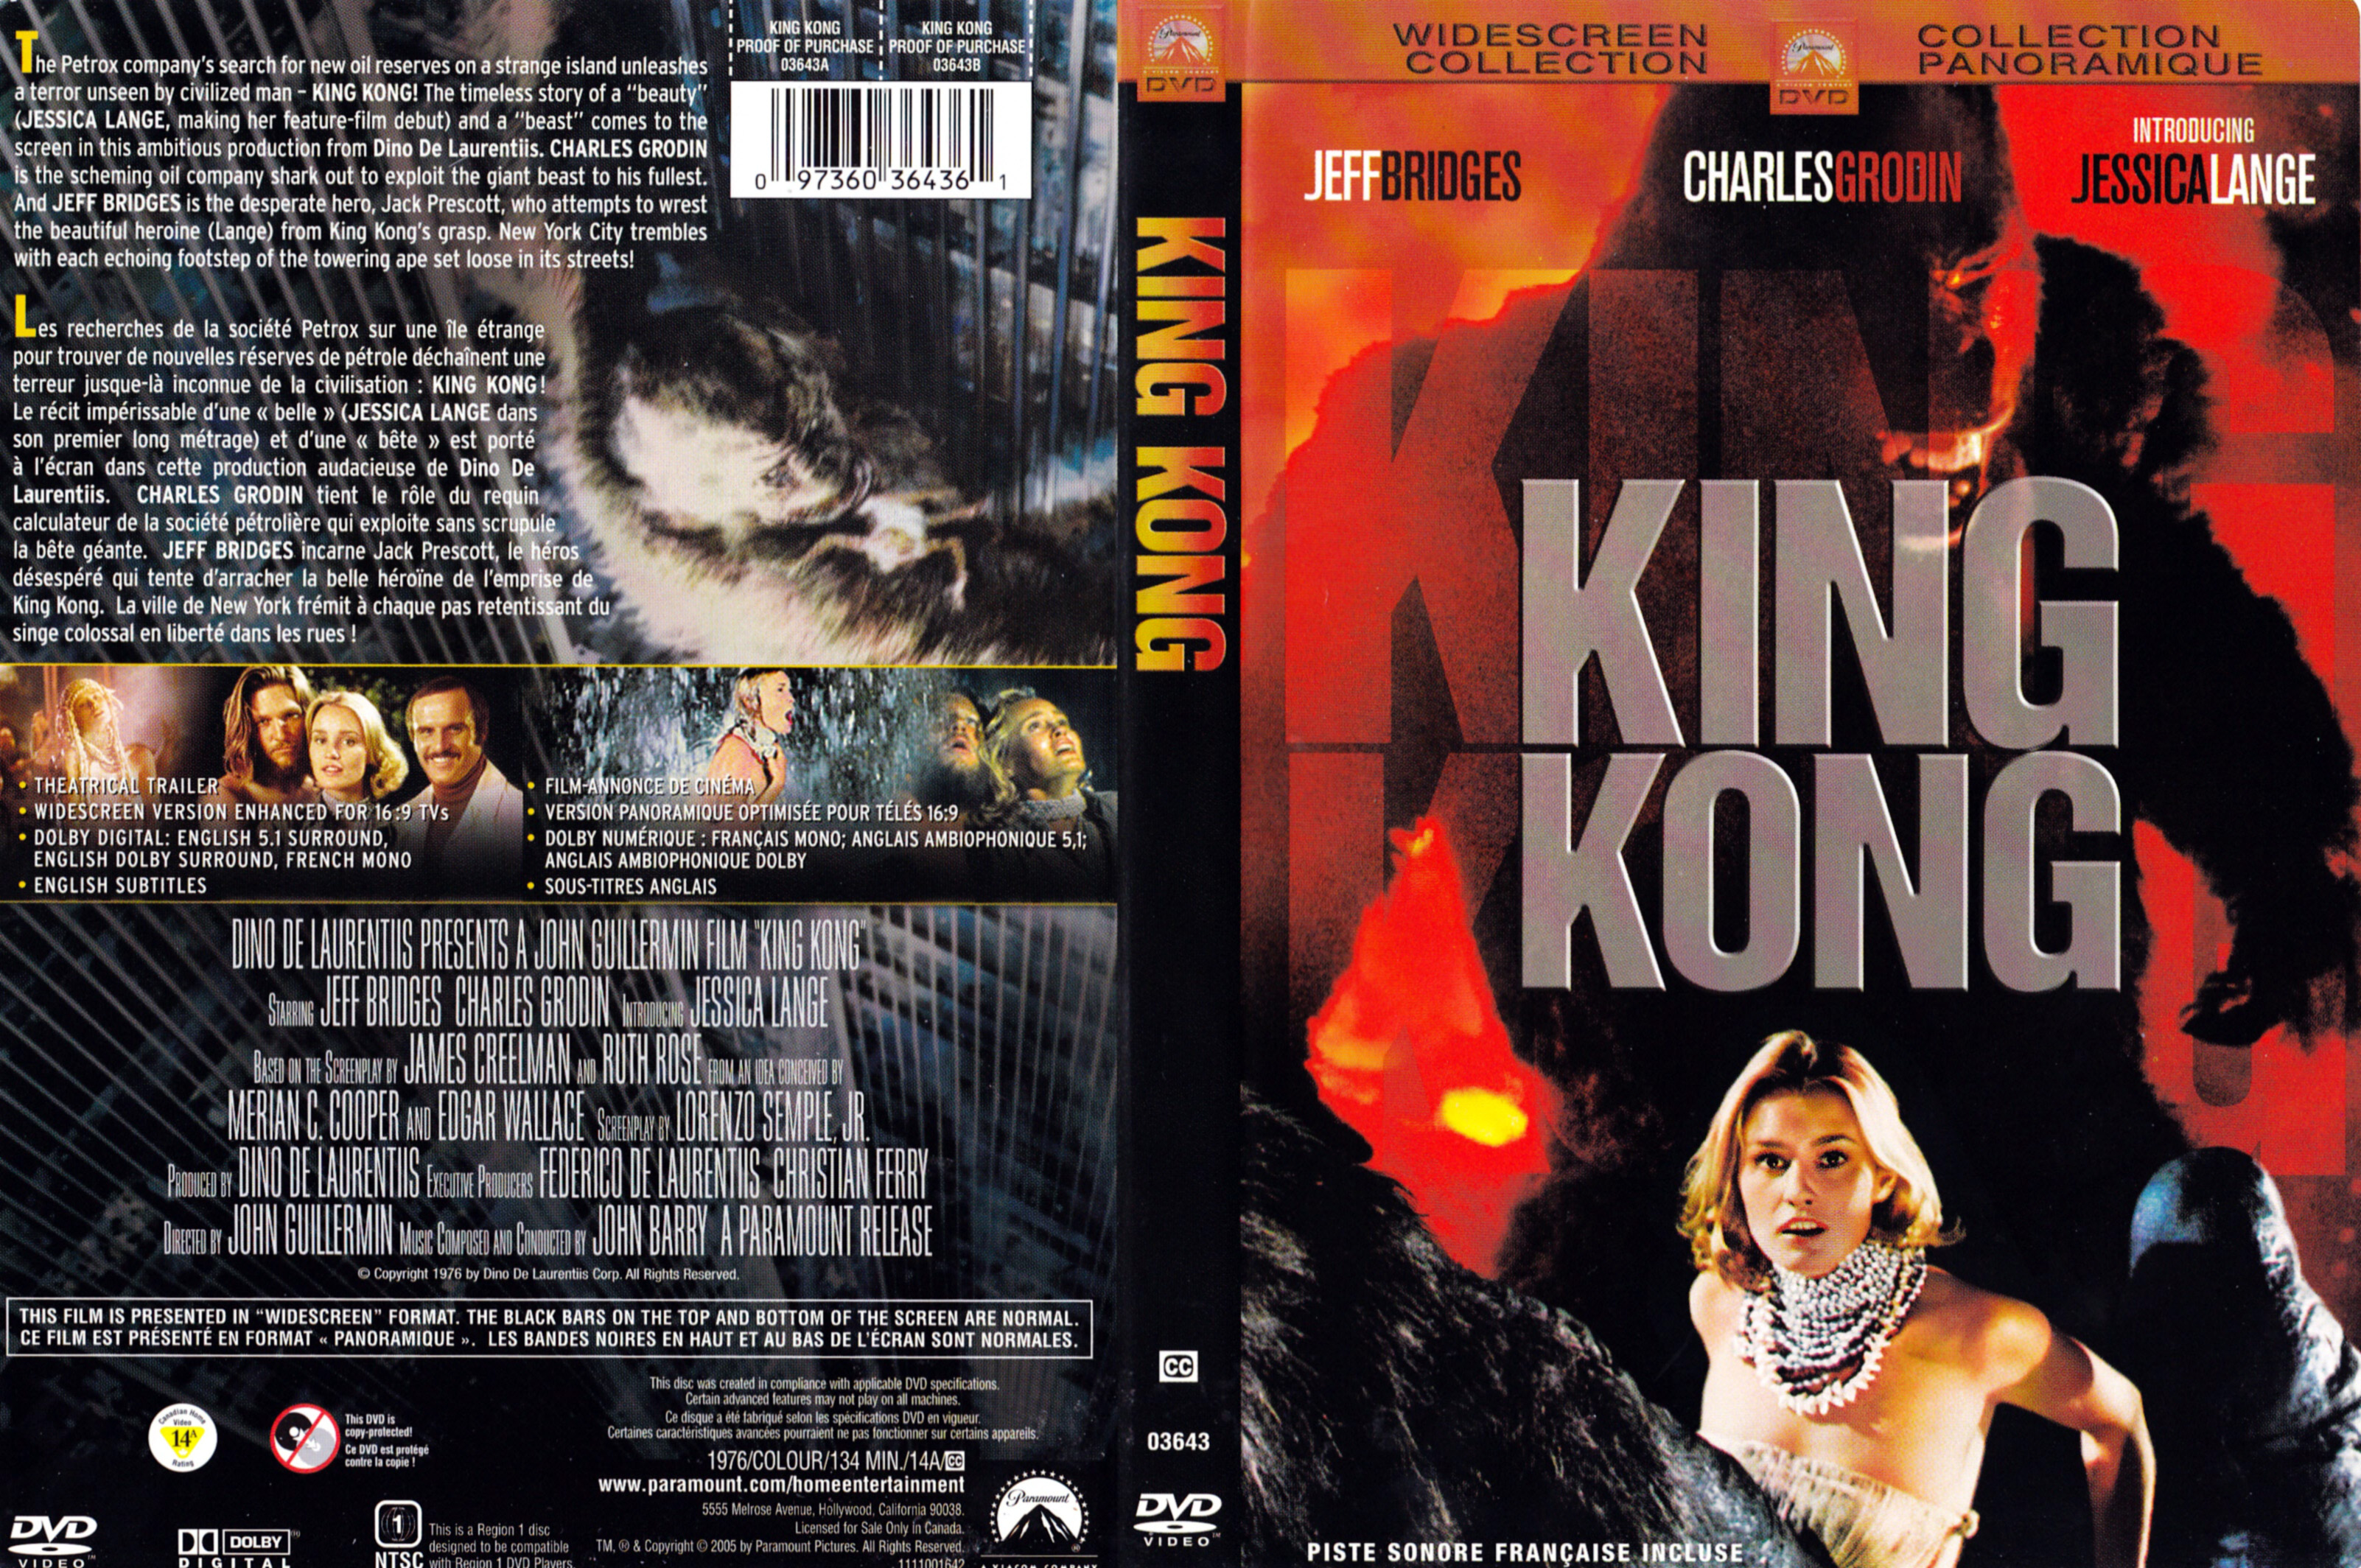 Jaquette DVD King kong (1976) (Canadienne)